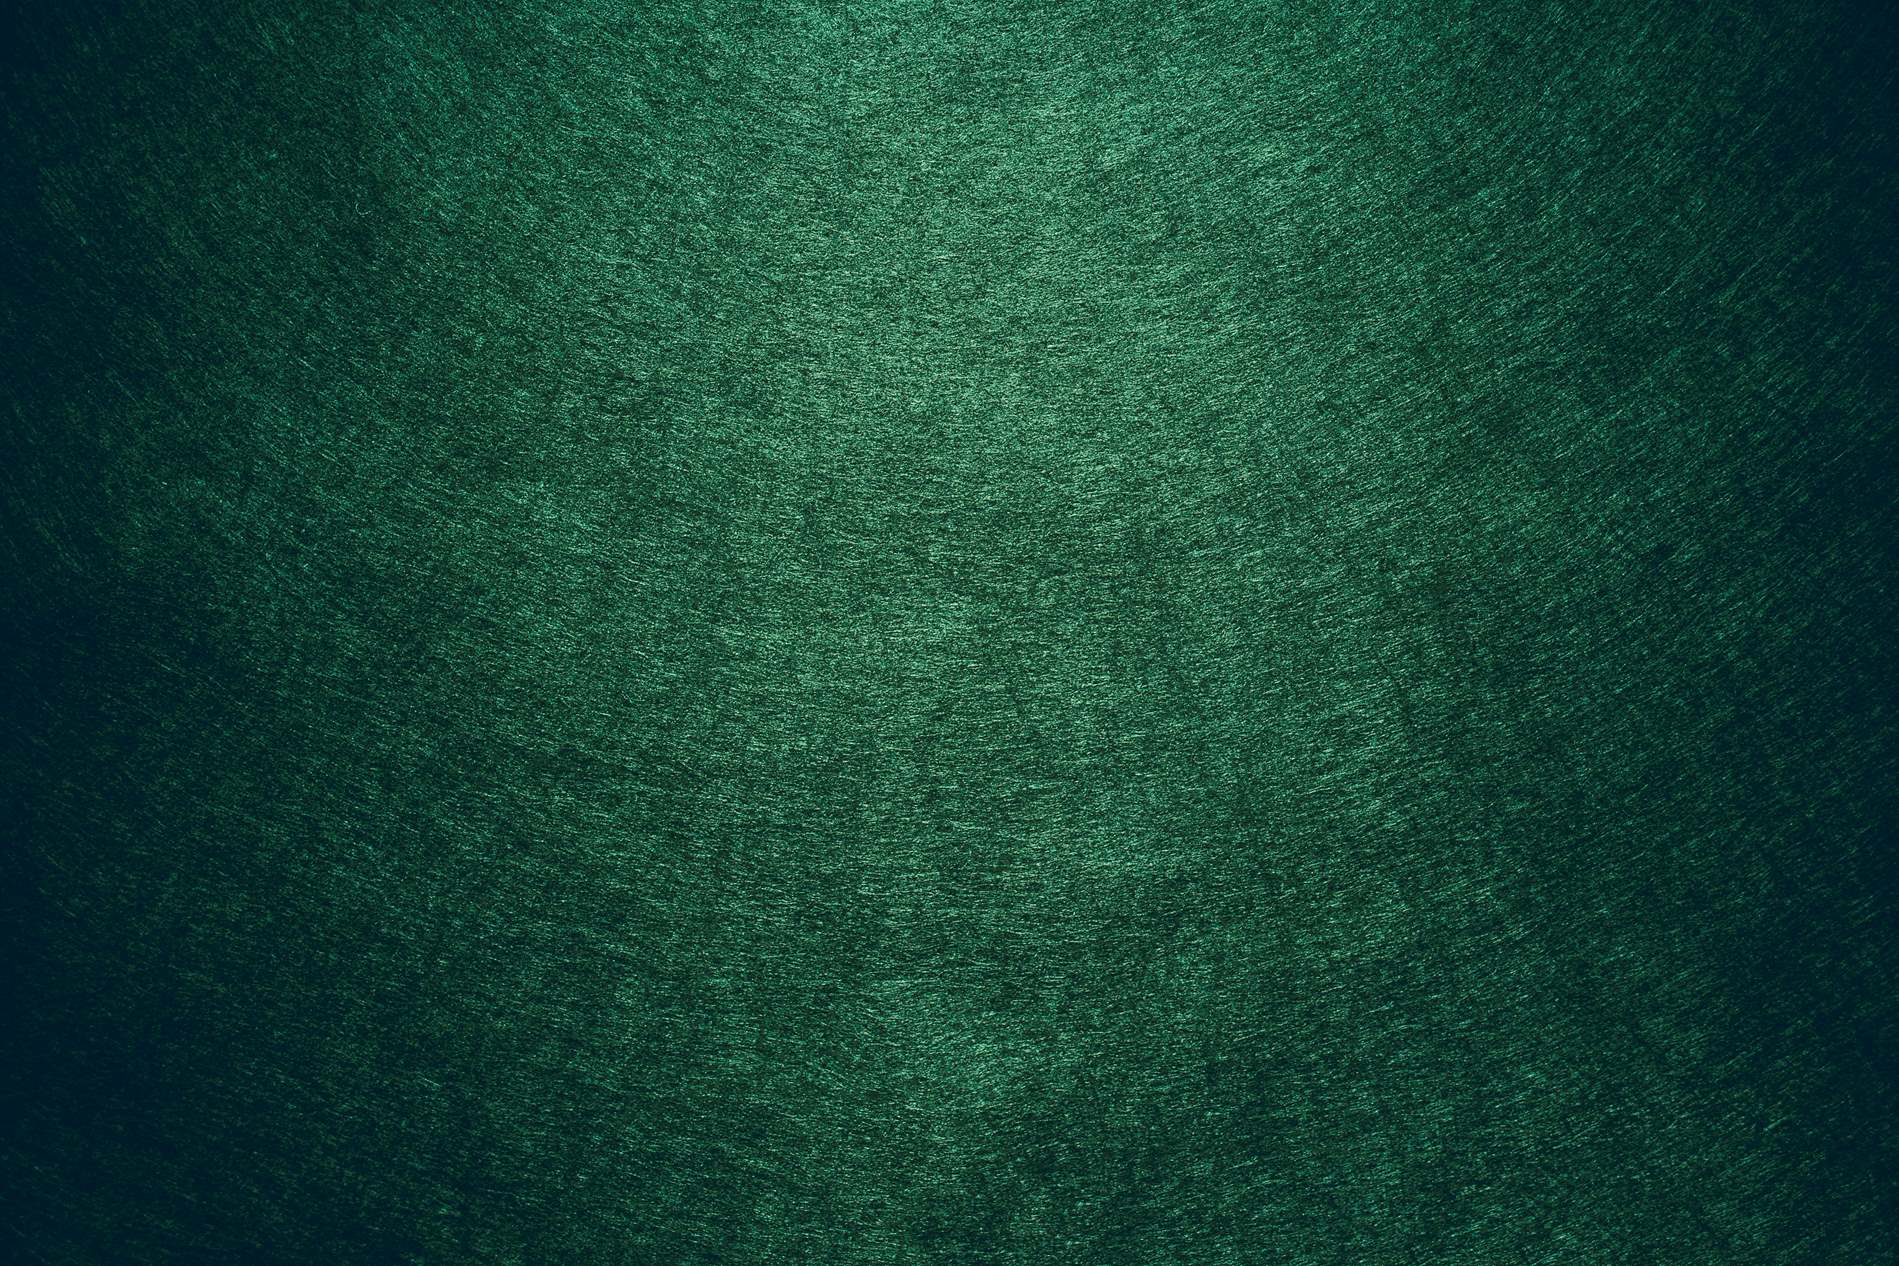 Green Fabric Background